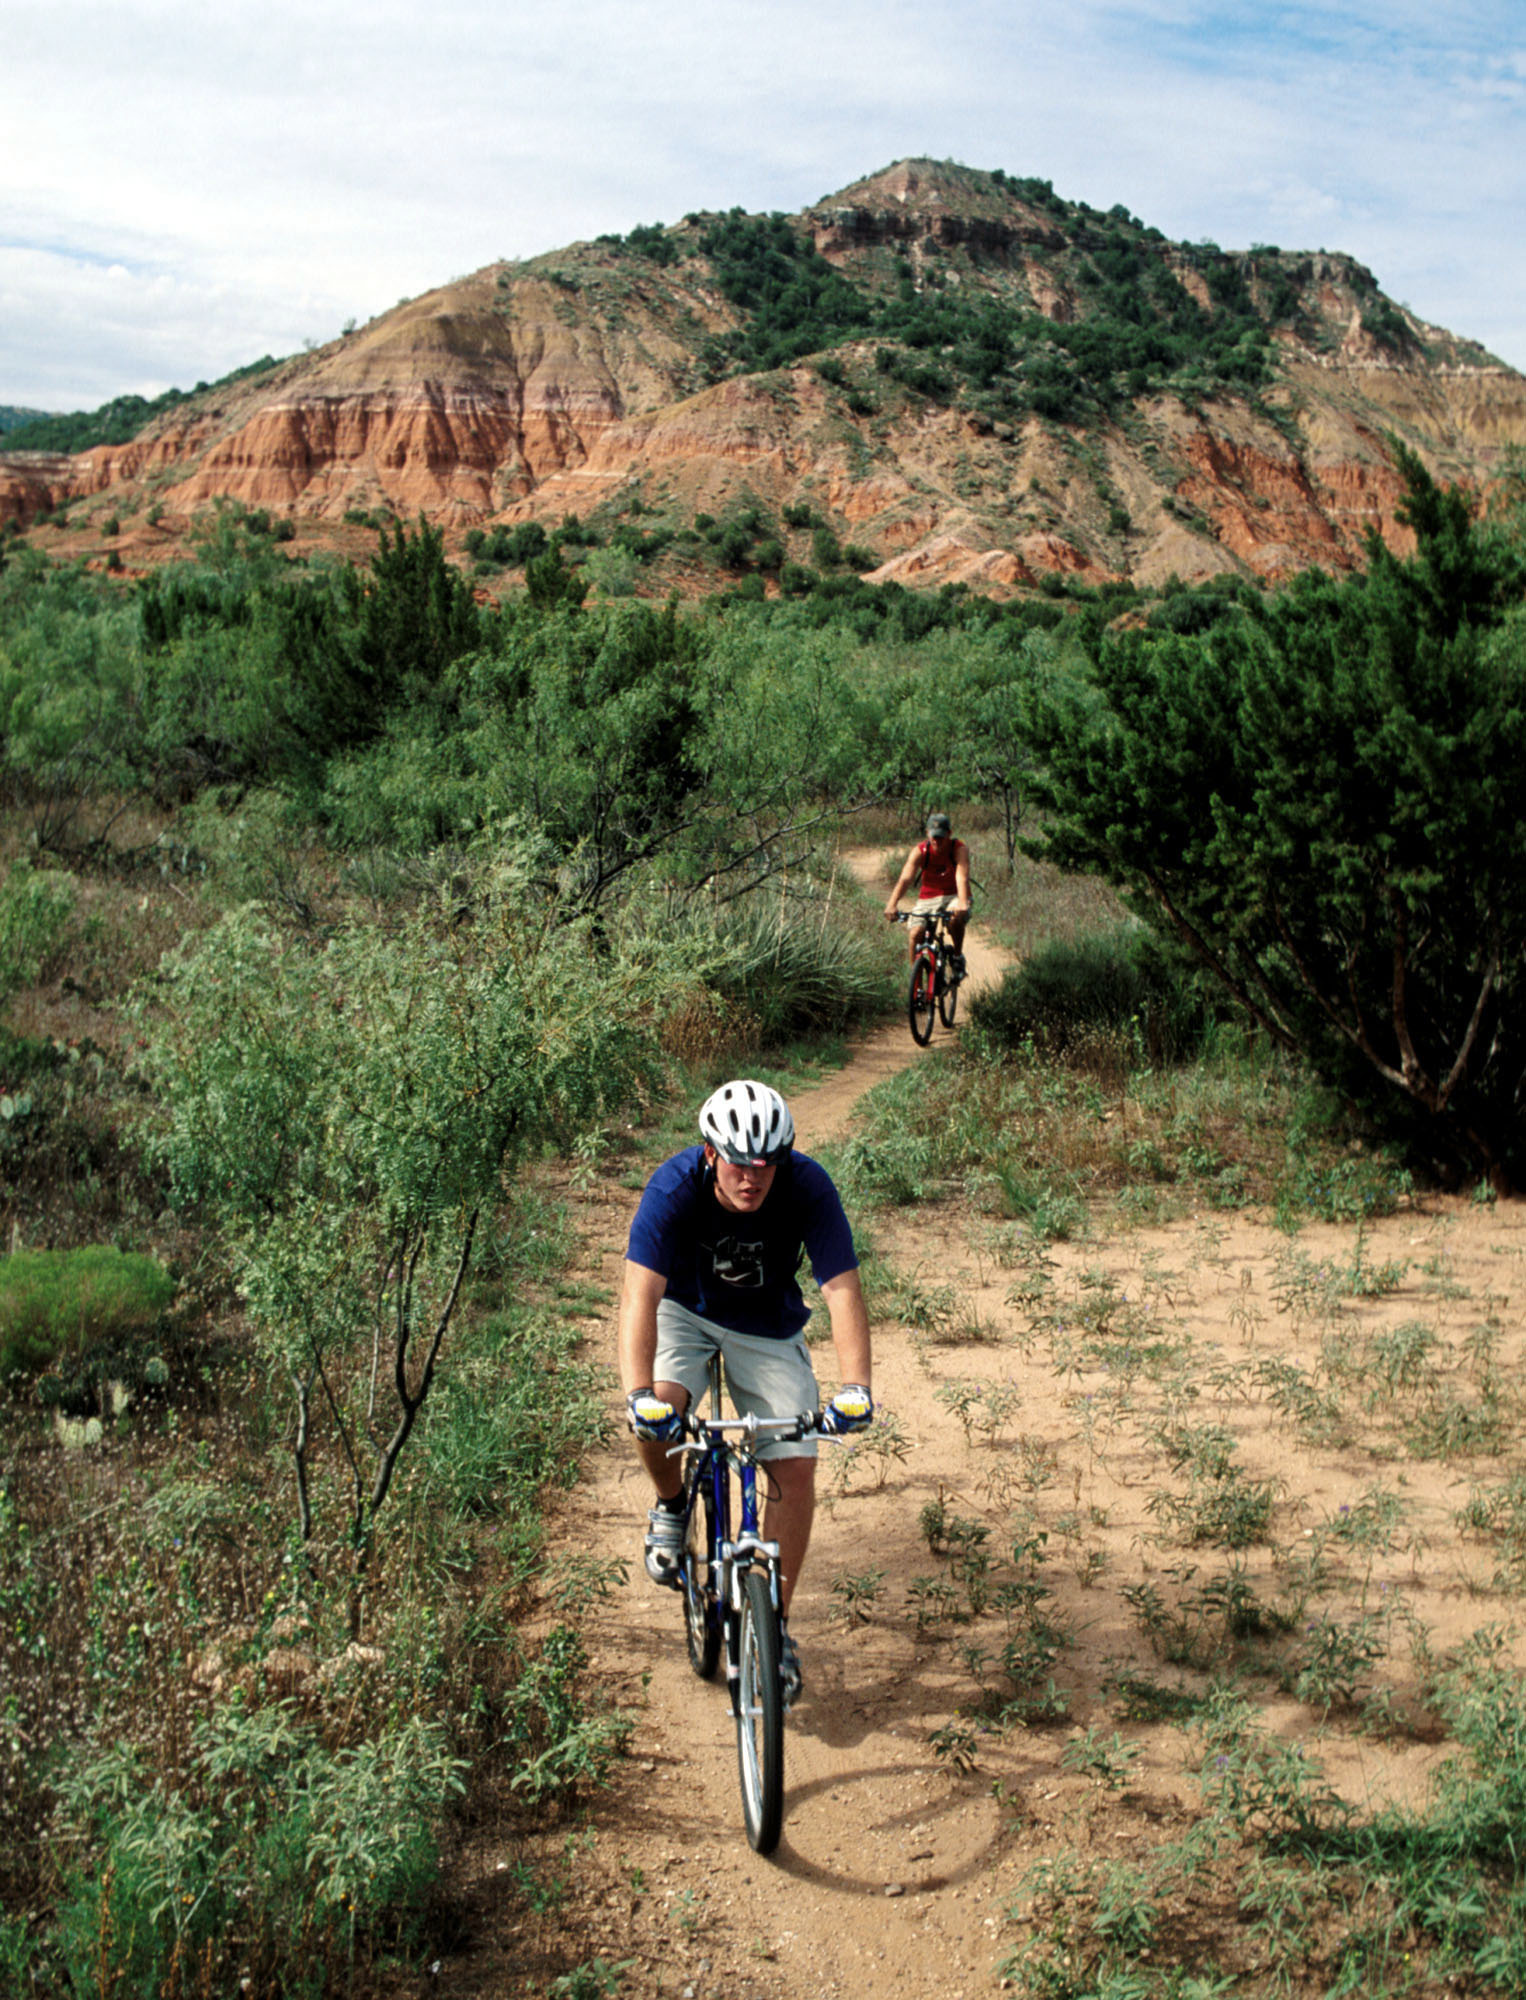 a group of people riding bikes on a dirt trail